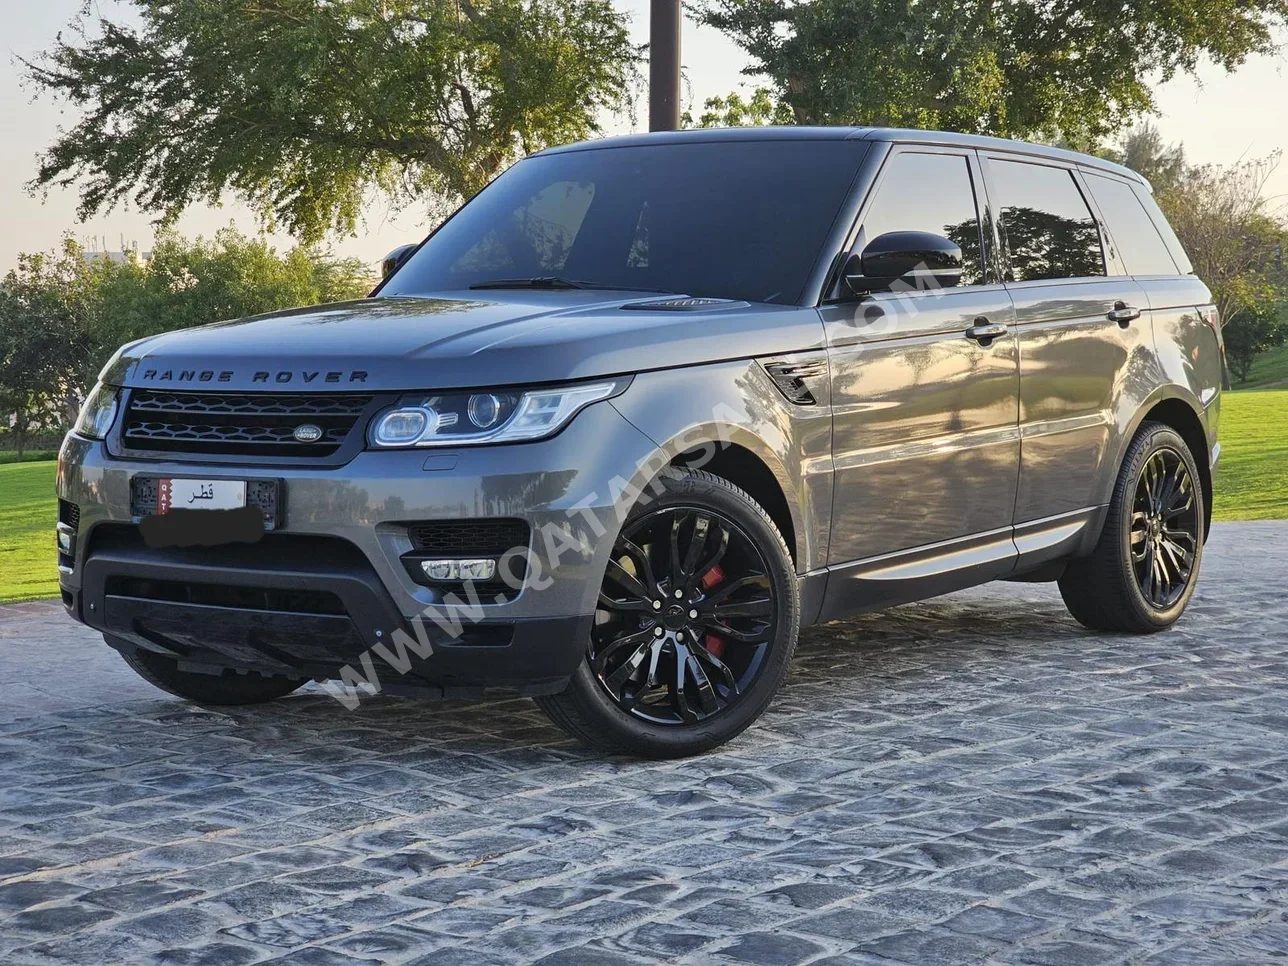 Land Rover  Range Rover  Sport Super charged  2015  Automatic  110,000 Km  8 Cylinder  Four Wheel Drive (4WD)  SUV  Silver